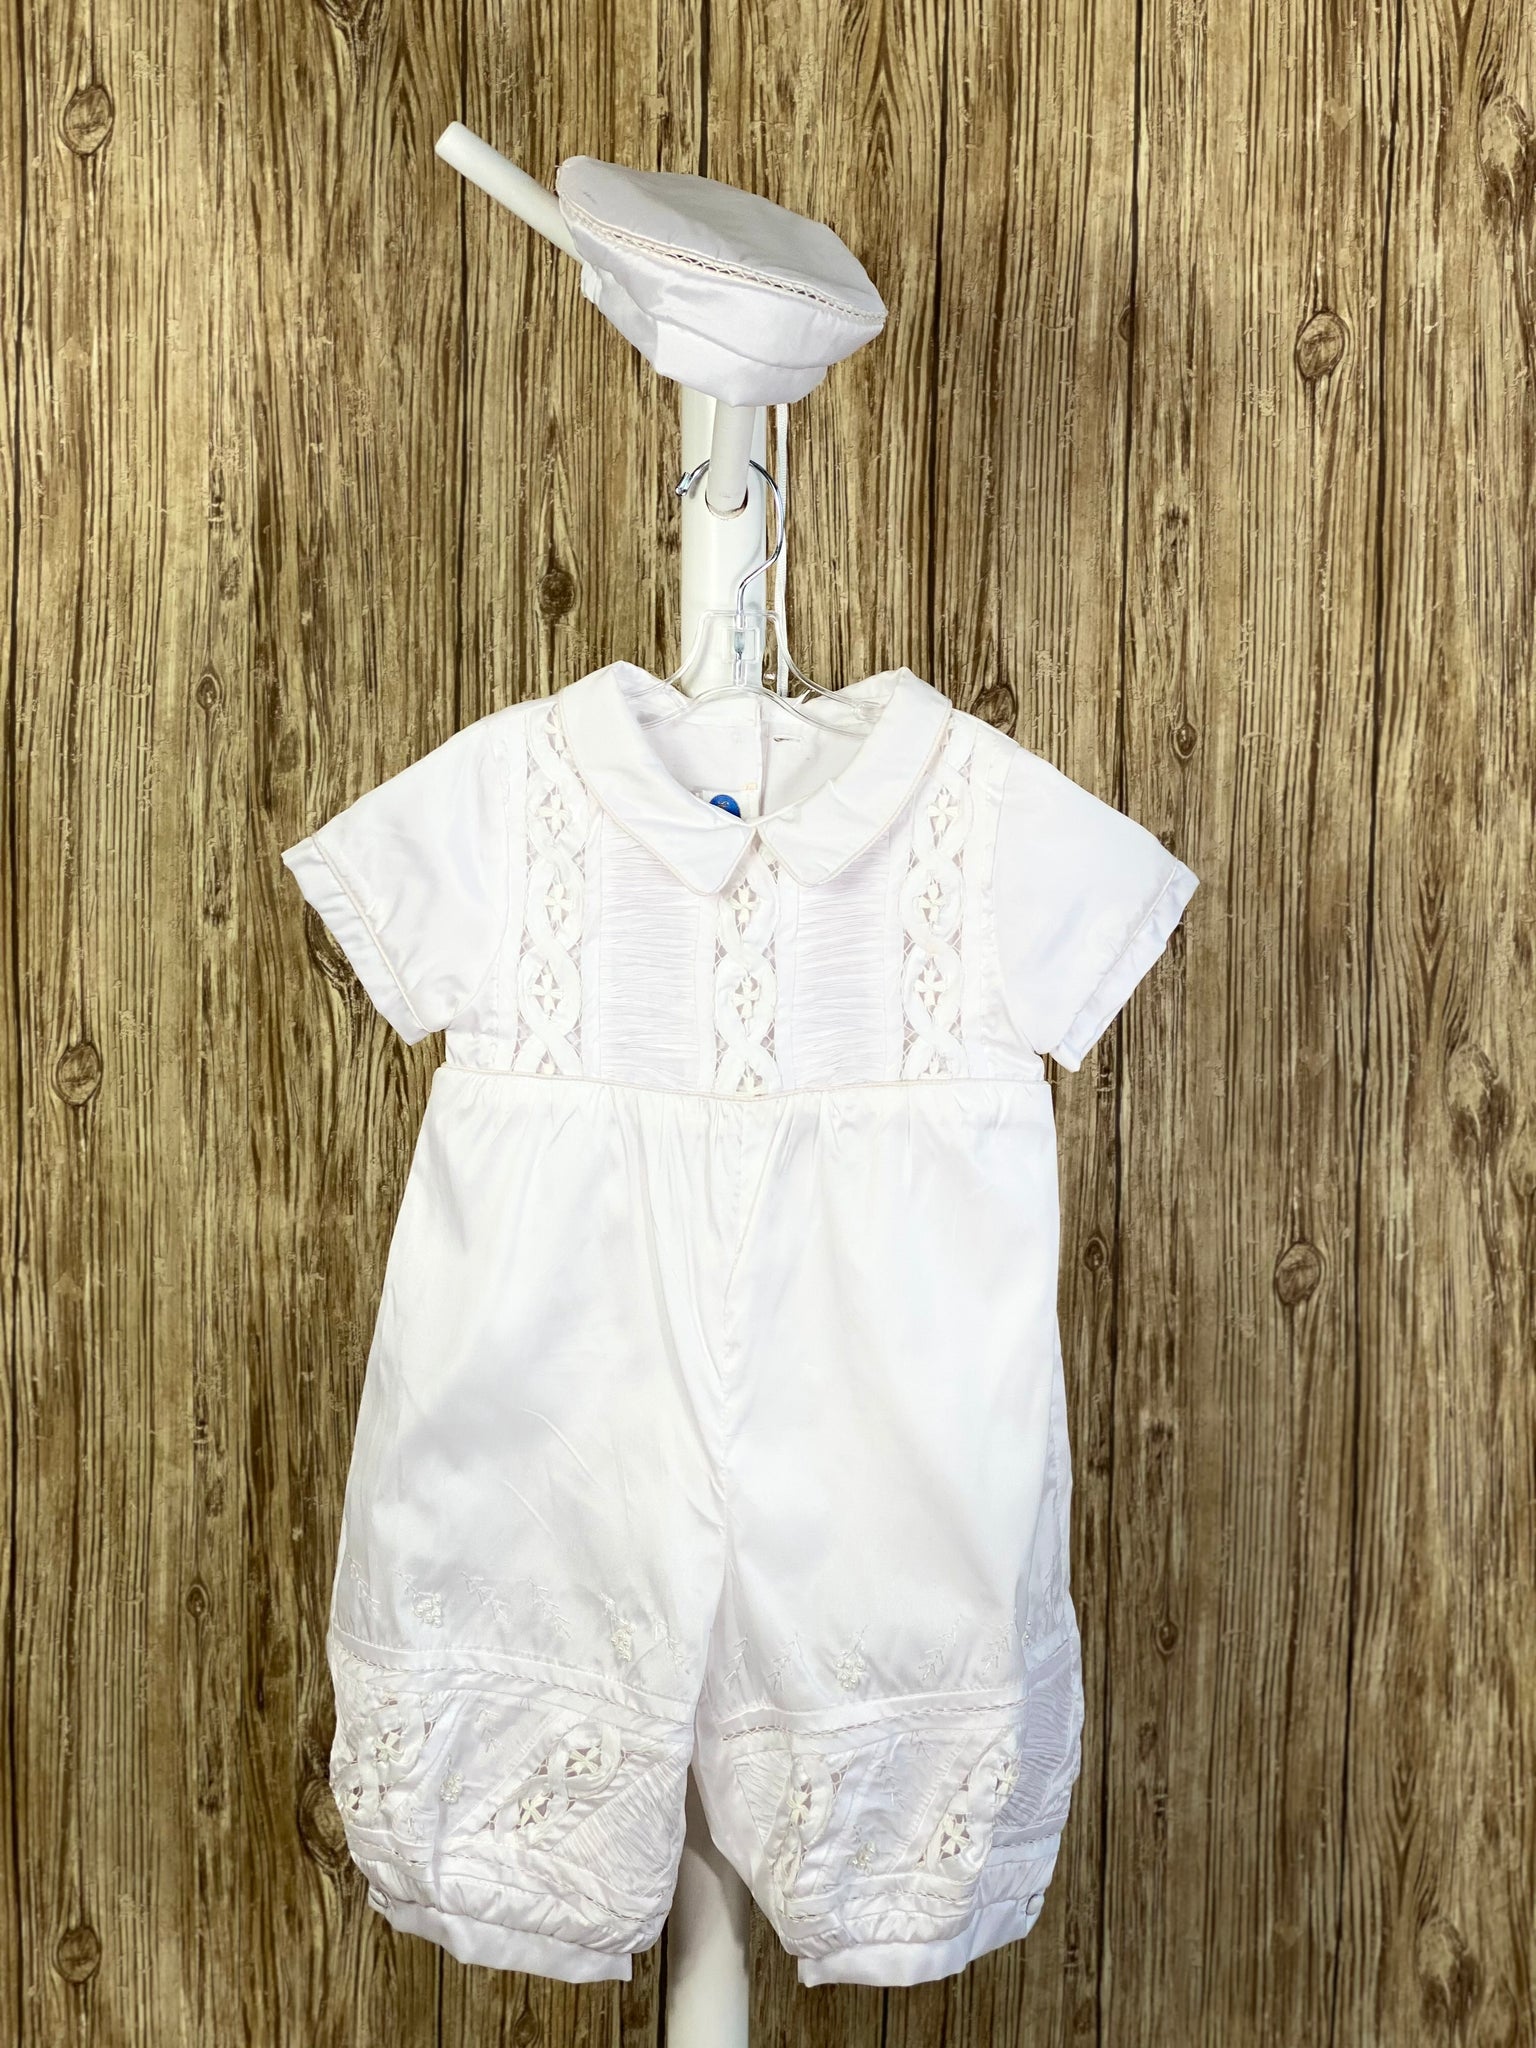 This a beautiful, one-of-a-kind boy’s baptism gown/set.  Lovely clothes for a precious child.  White, size 12M 2-piece set including romper and belt Buttoning on cuffs Collared with short sleeves Buttoning on back of romper Pleated columns on bodice and legs of romper Crochet cross lace columns on bodice and legs of romper Hand-stitched trim around legs of romper Hand-stitched leaf designs on legs of romper with pearl detailing inside Thin pin-striping on belt